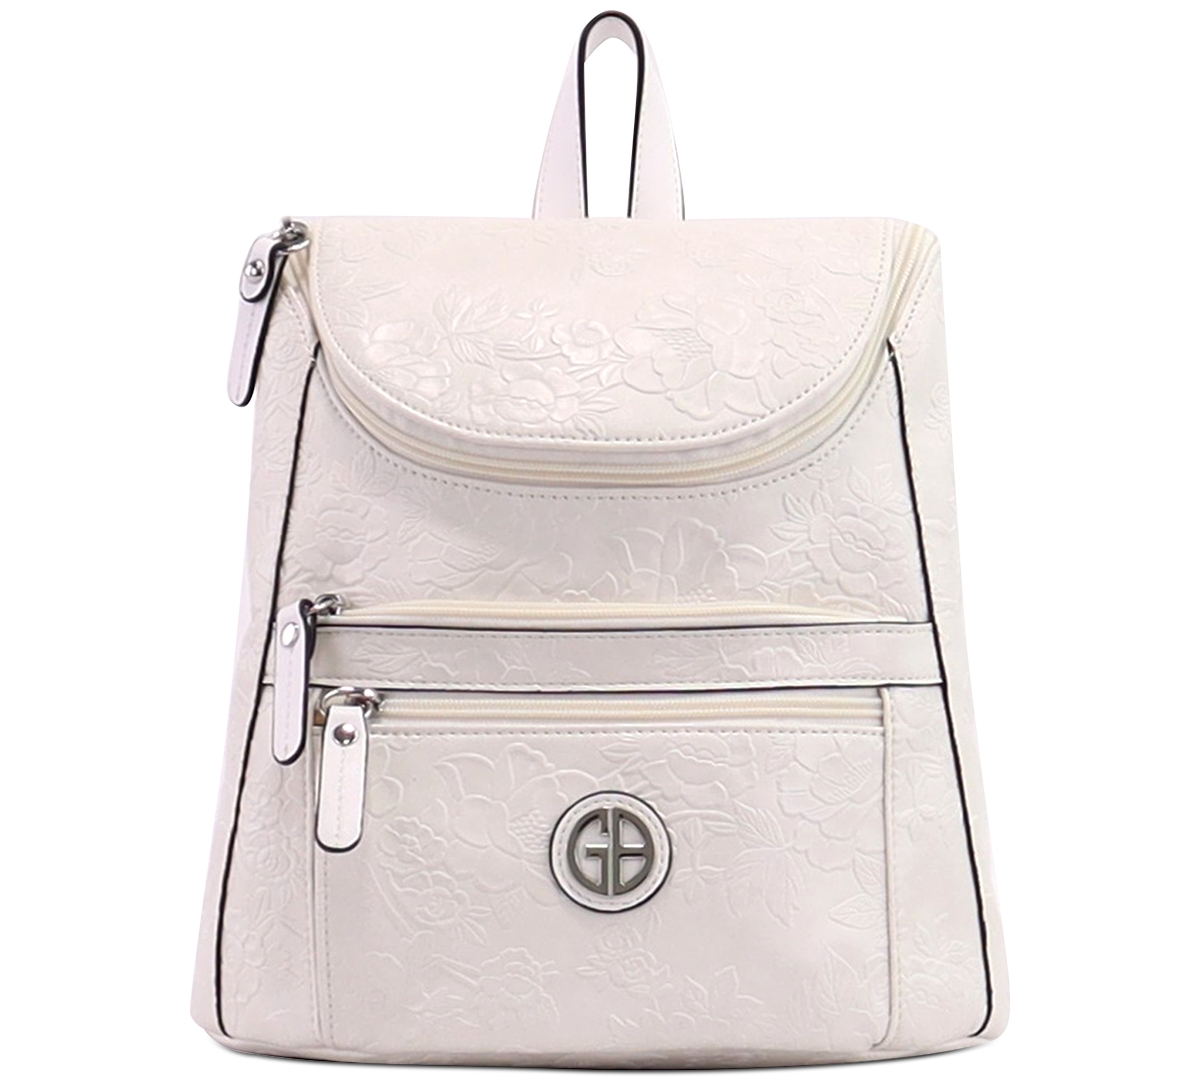 Pebble Backpack, Created for Macy's - Ivory